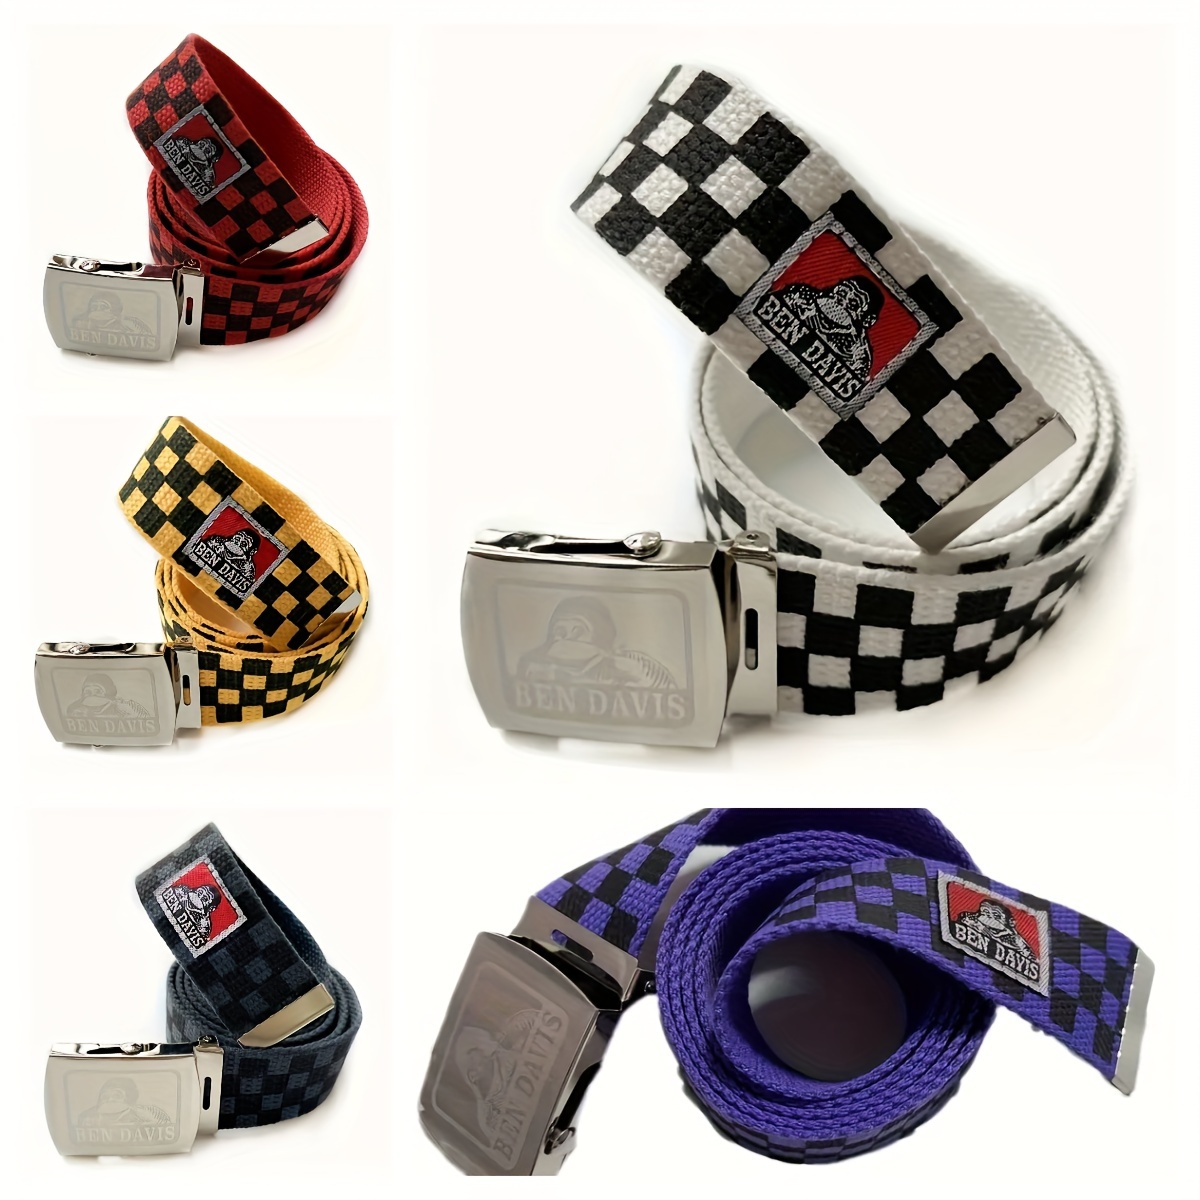 

1pc Fashionable Belt, Gorilla Belt, Plaid Pattern, Brief And Simple Design, Useful And Durable, For Casual Wear Festival Party Daily Life Vacation, Man